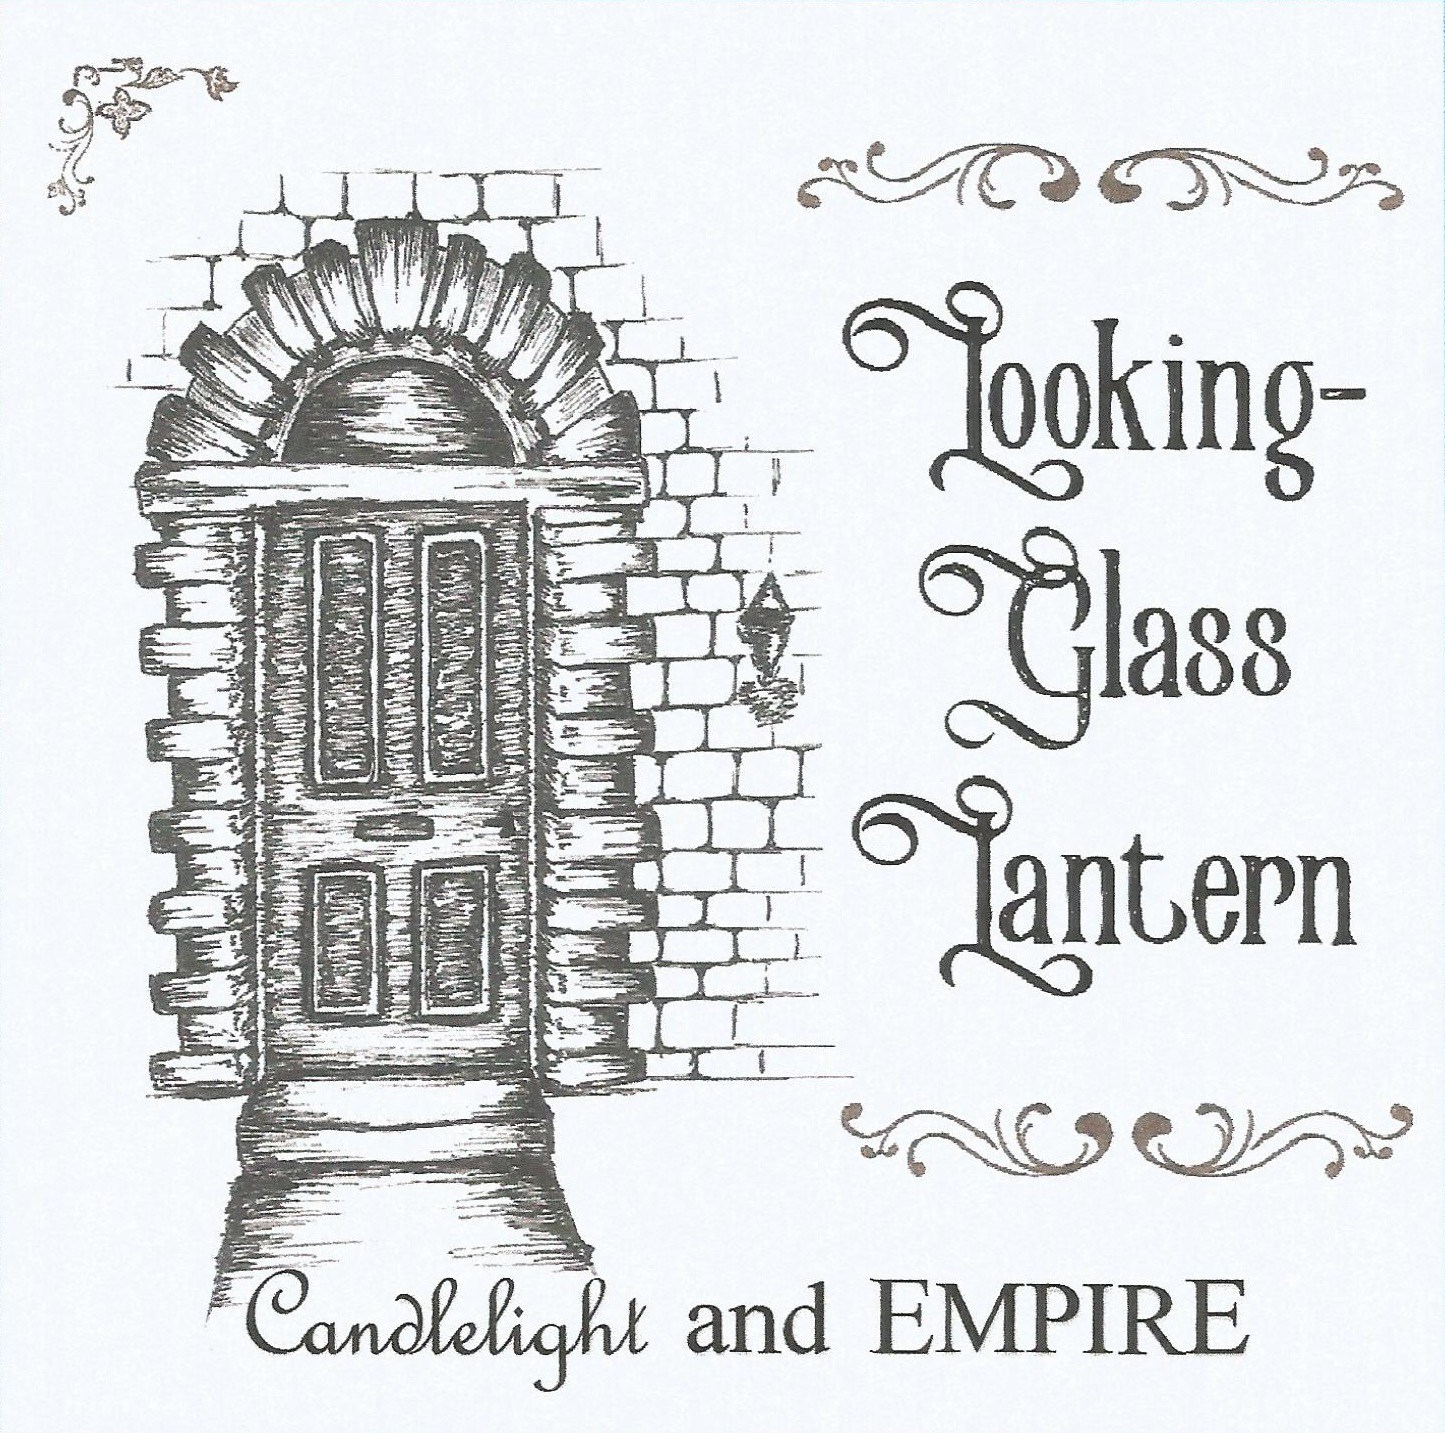 Candlelight and empire - LOOKING-GLASS LANTERN